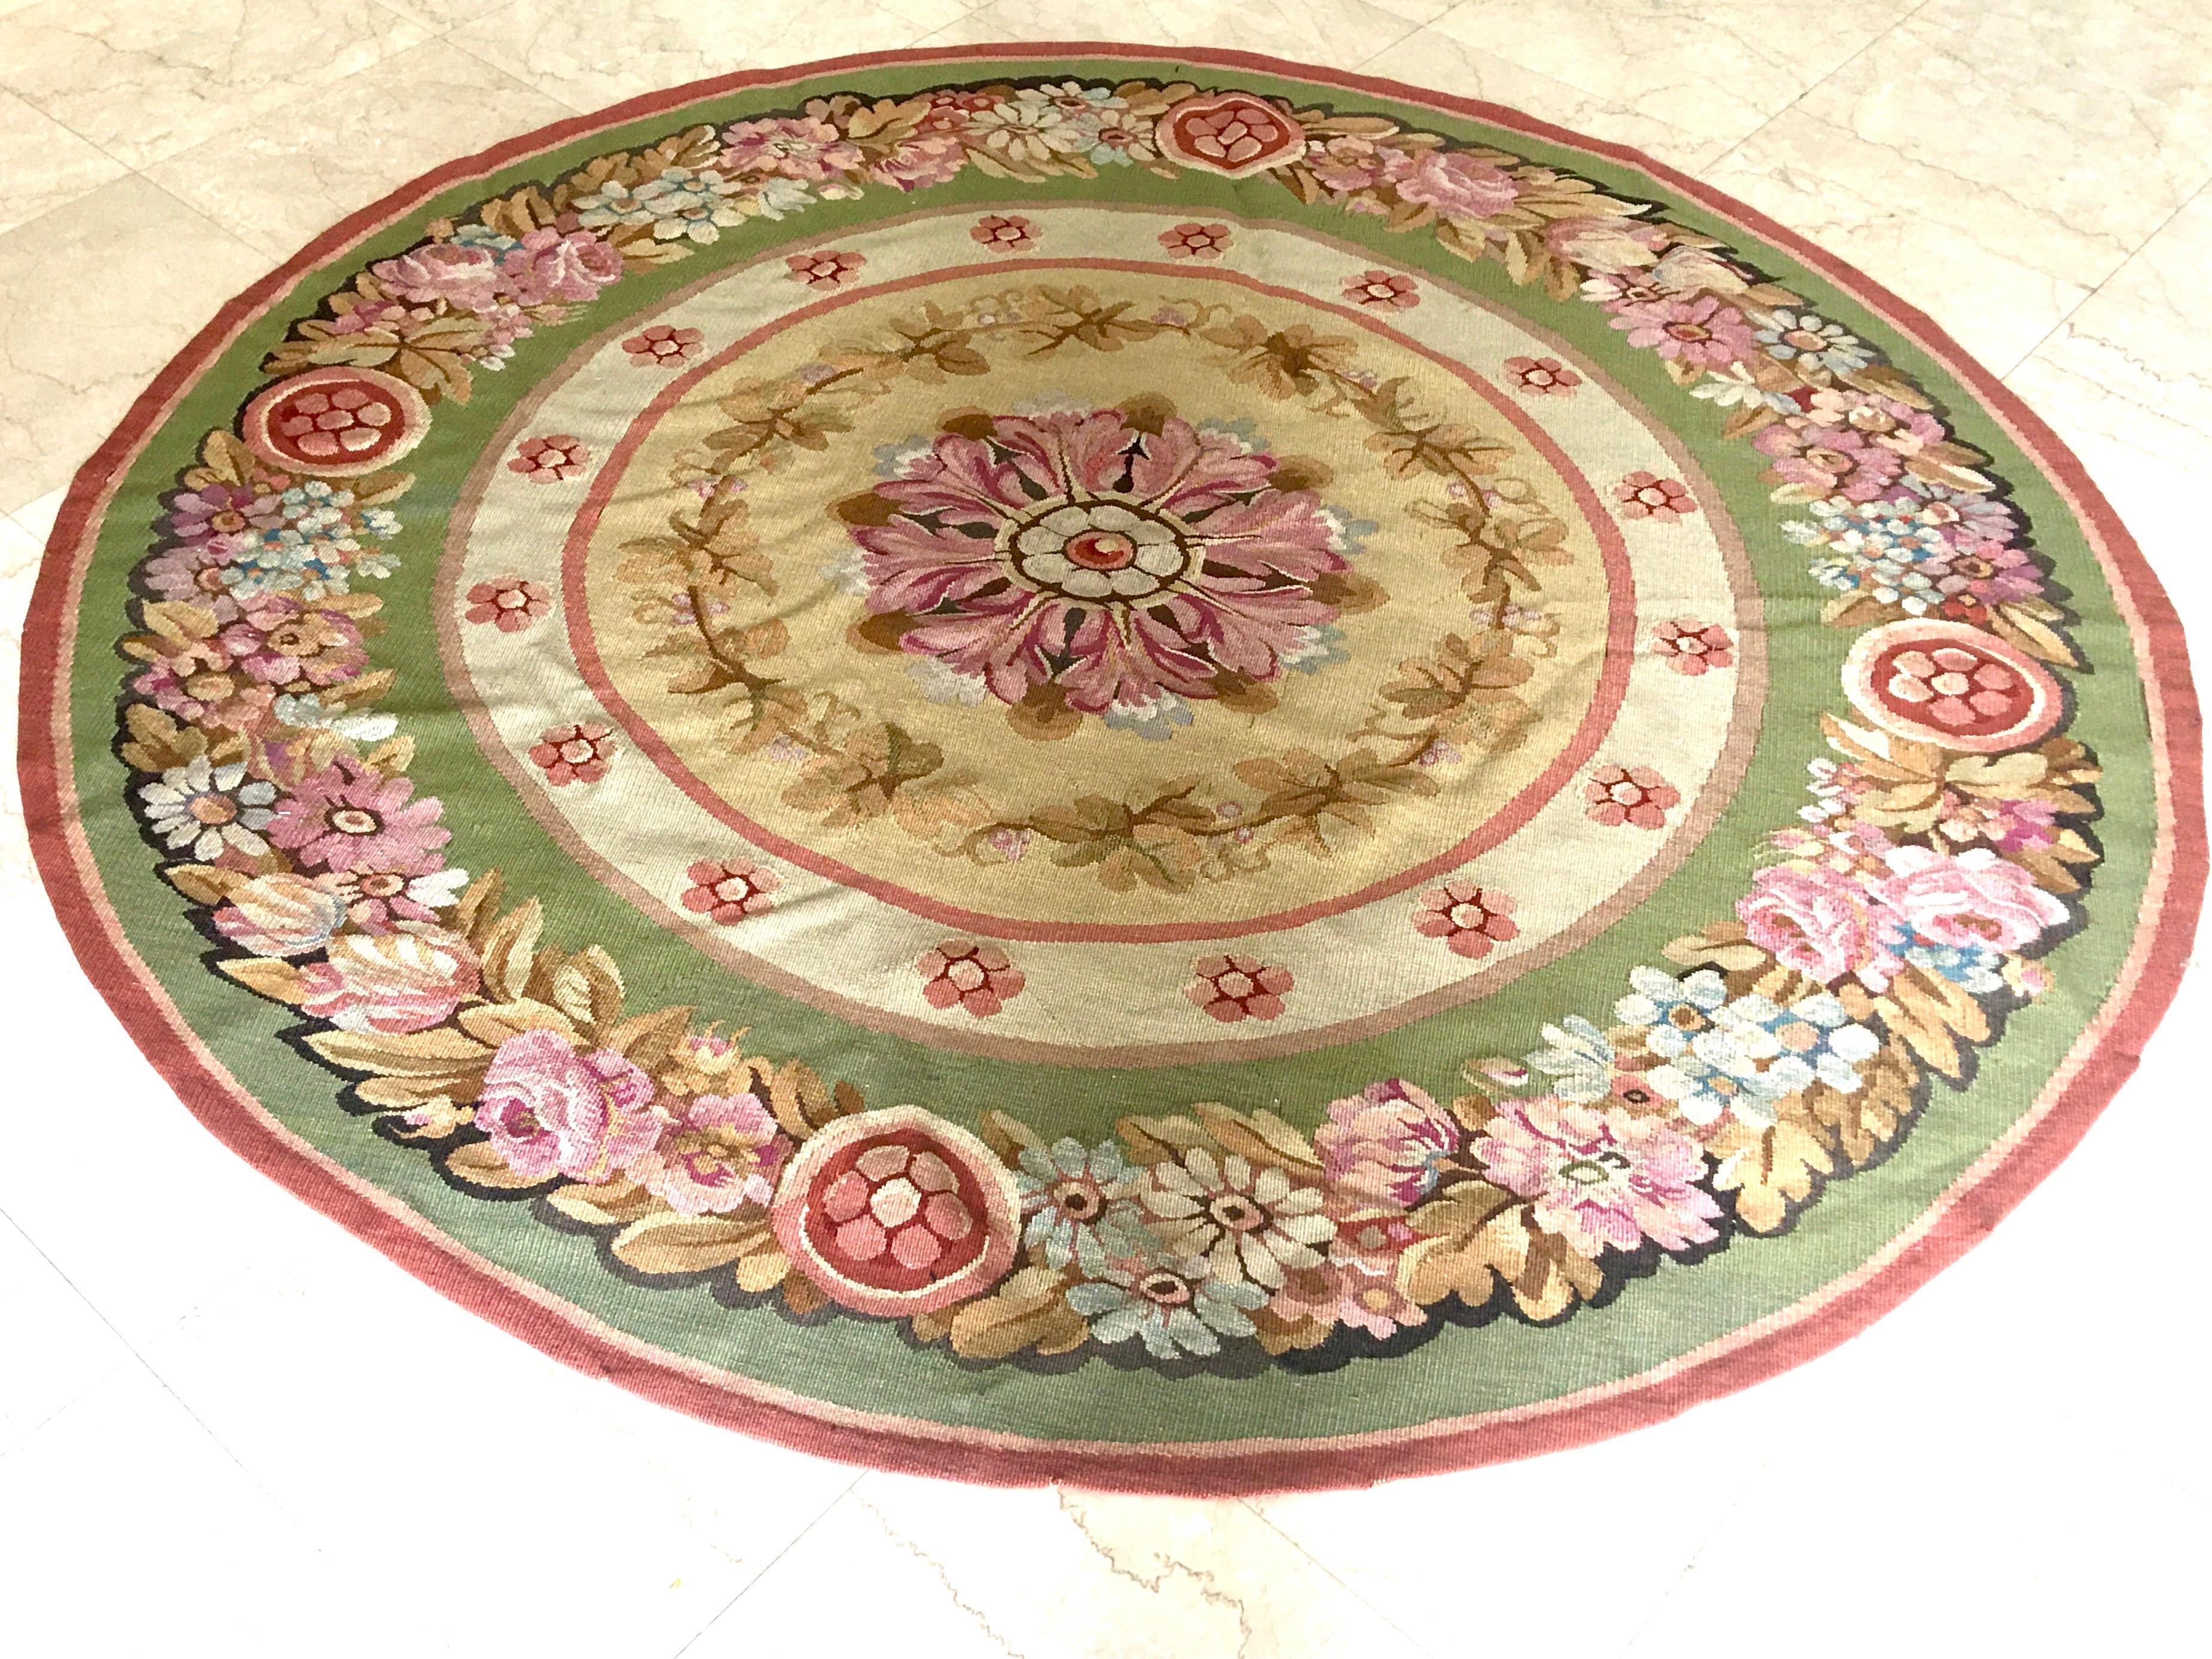 Hand-Woven Round Circular Mid 19th C. Ivory Beige Floral French Aubusson Tapestry Rug For Sale